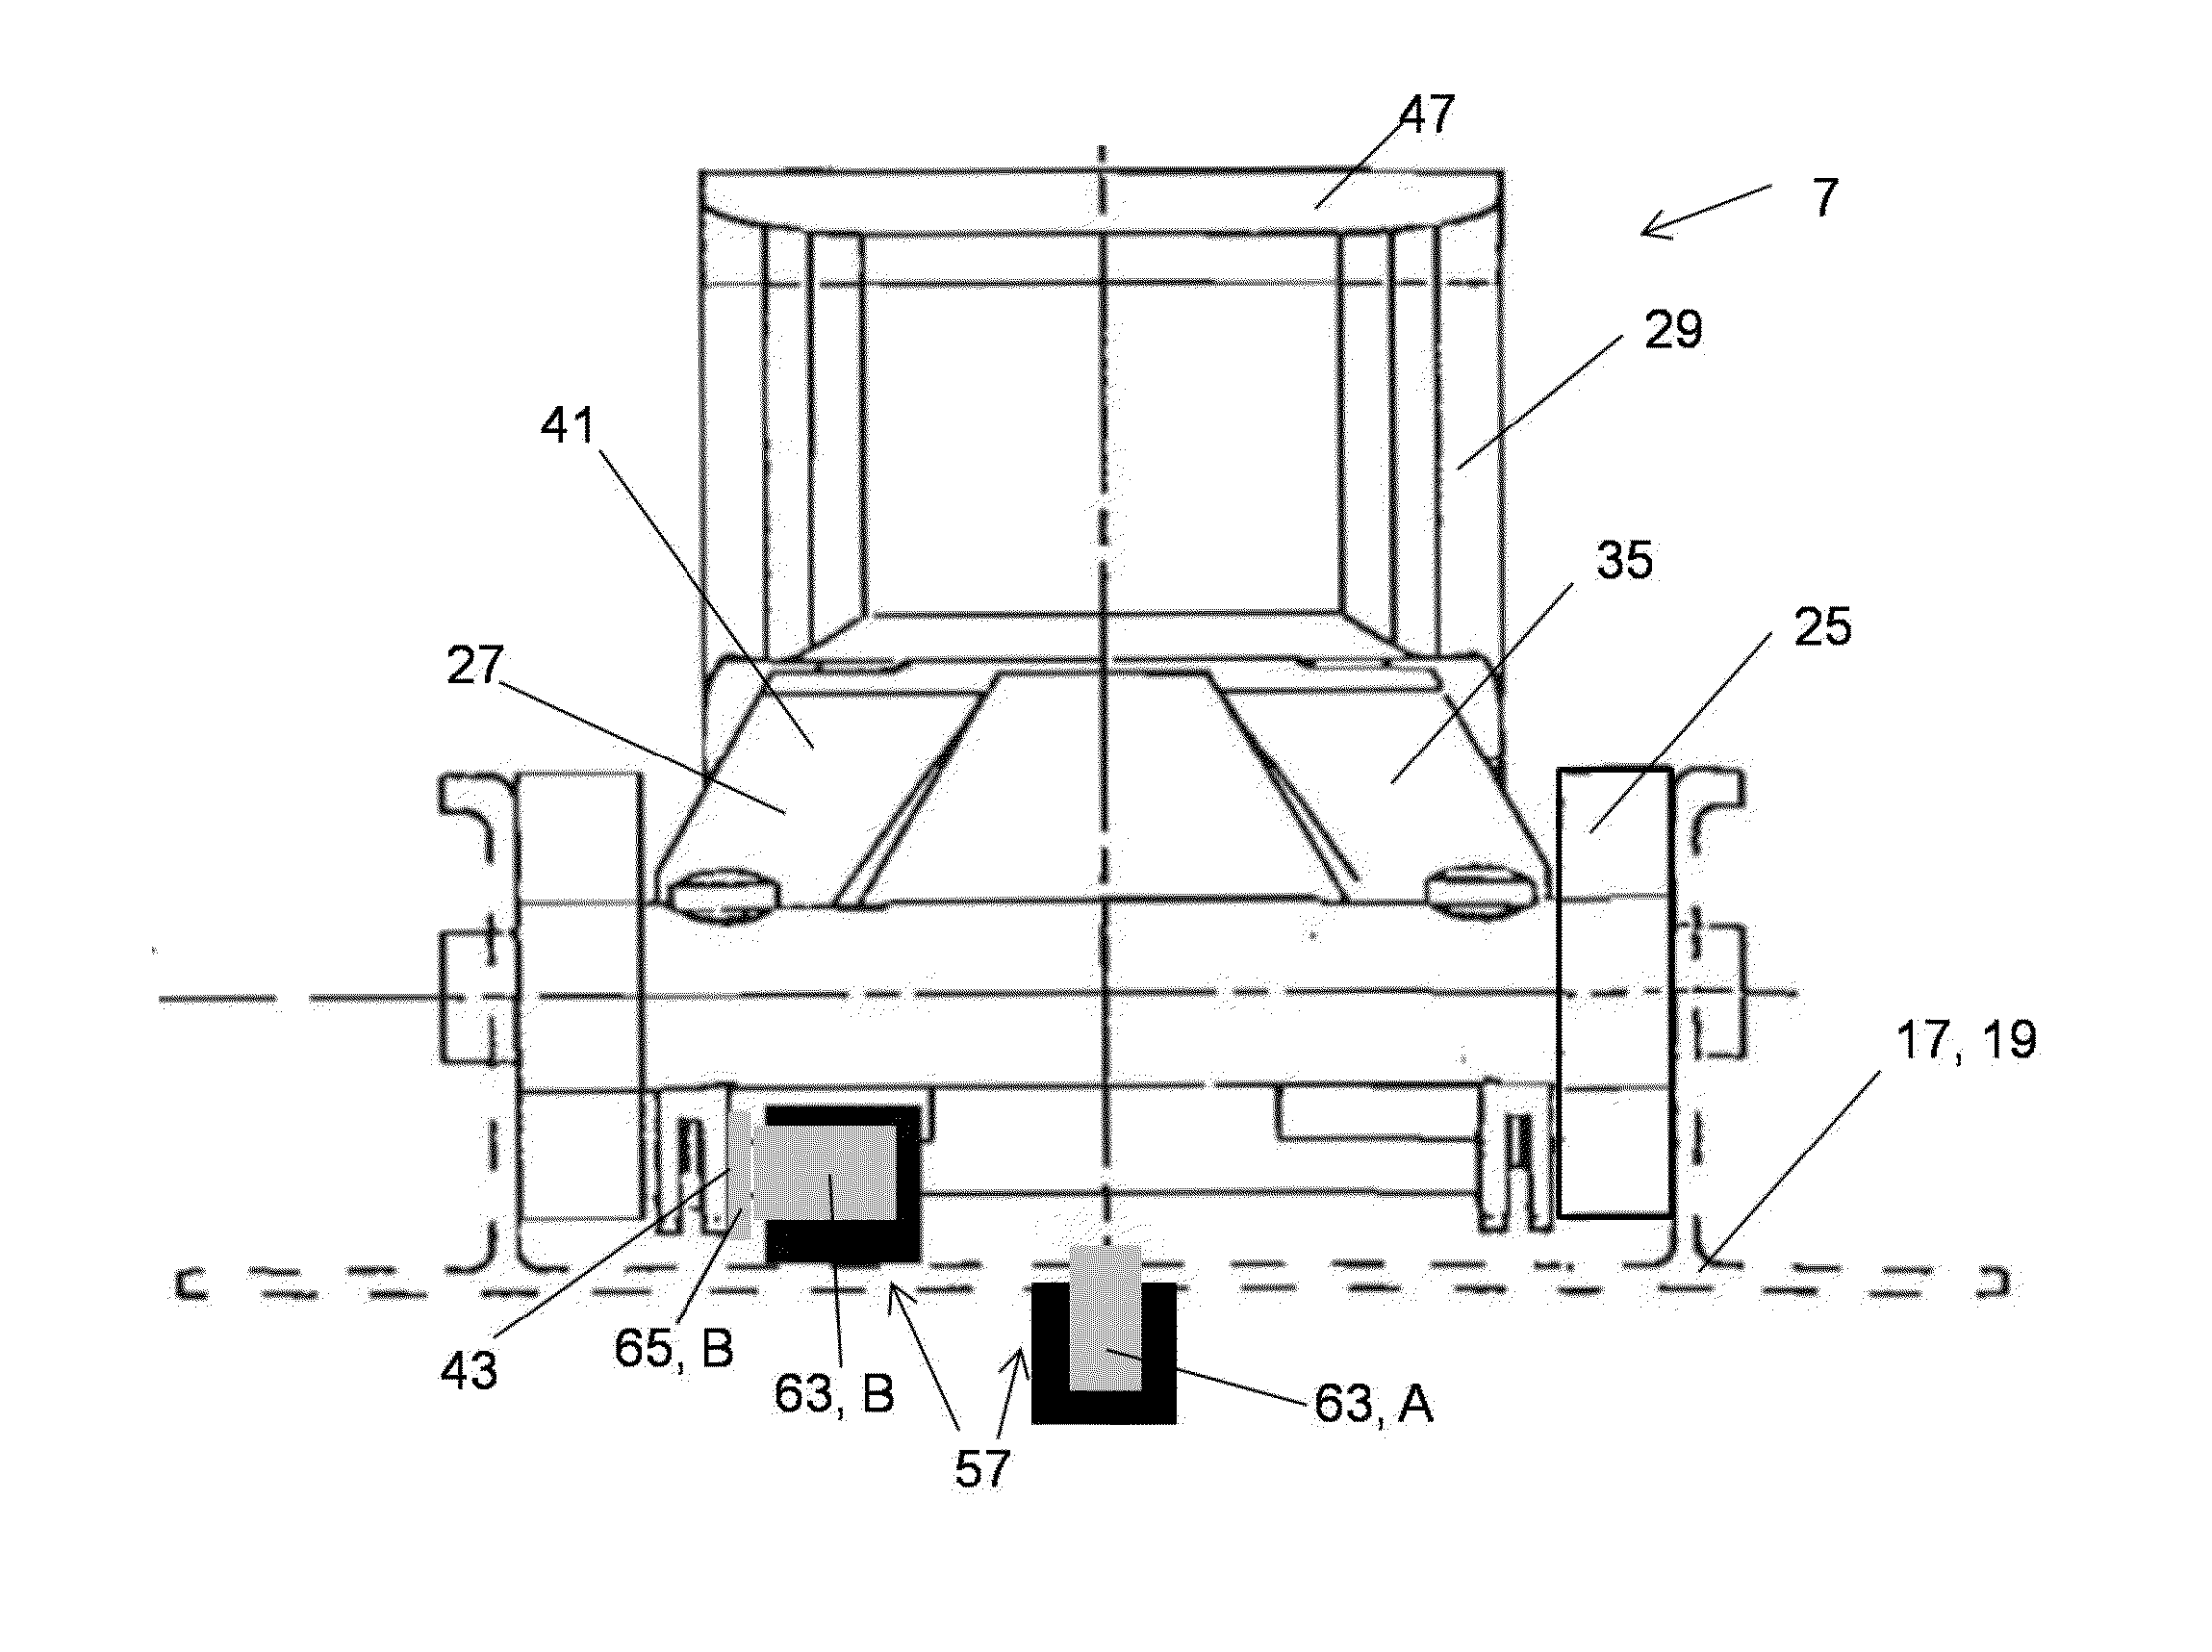 Vehicle cargo compartment, system and vehicle